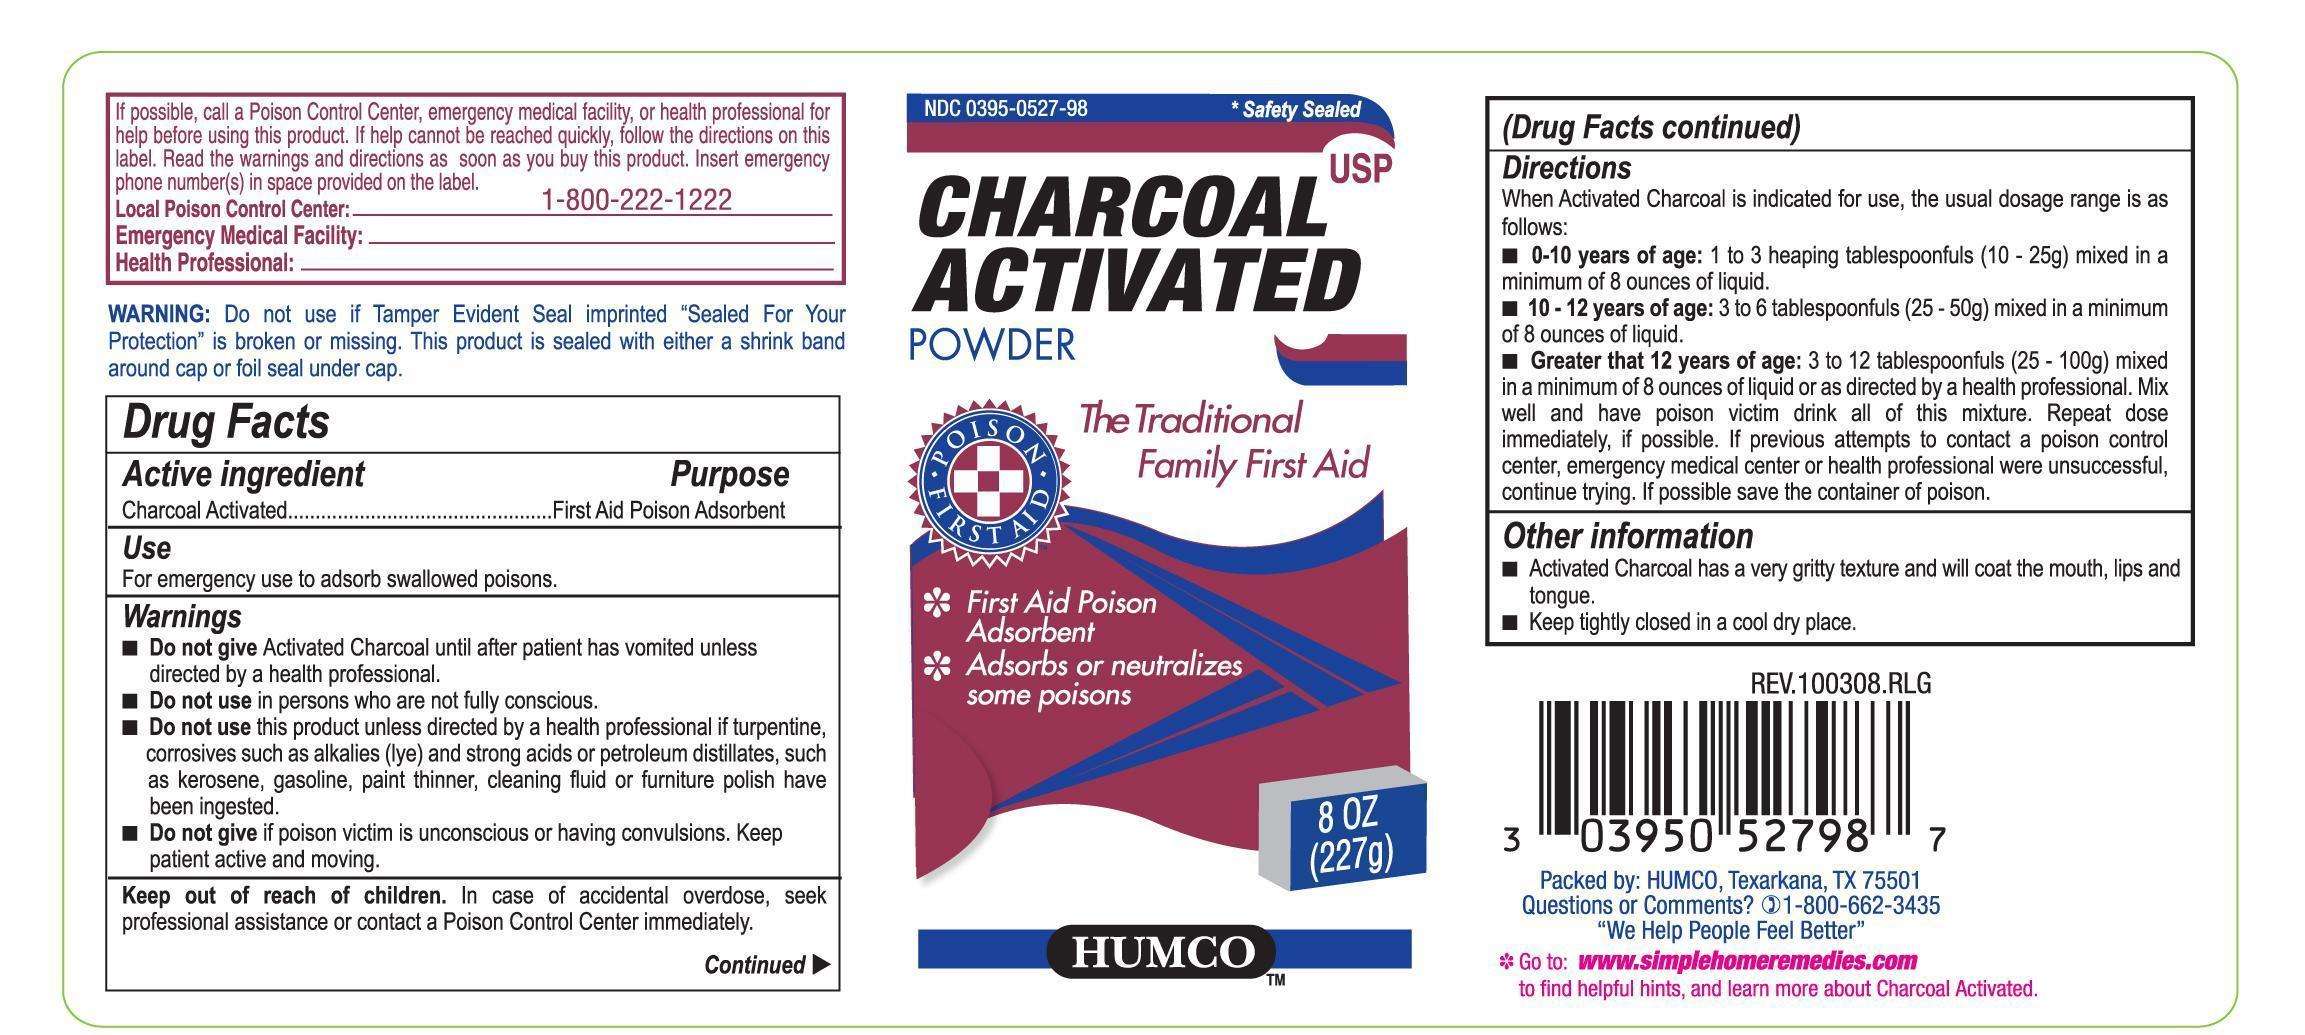 Humco Charcoal Activated